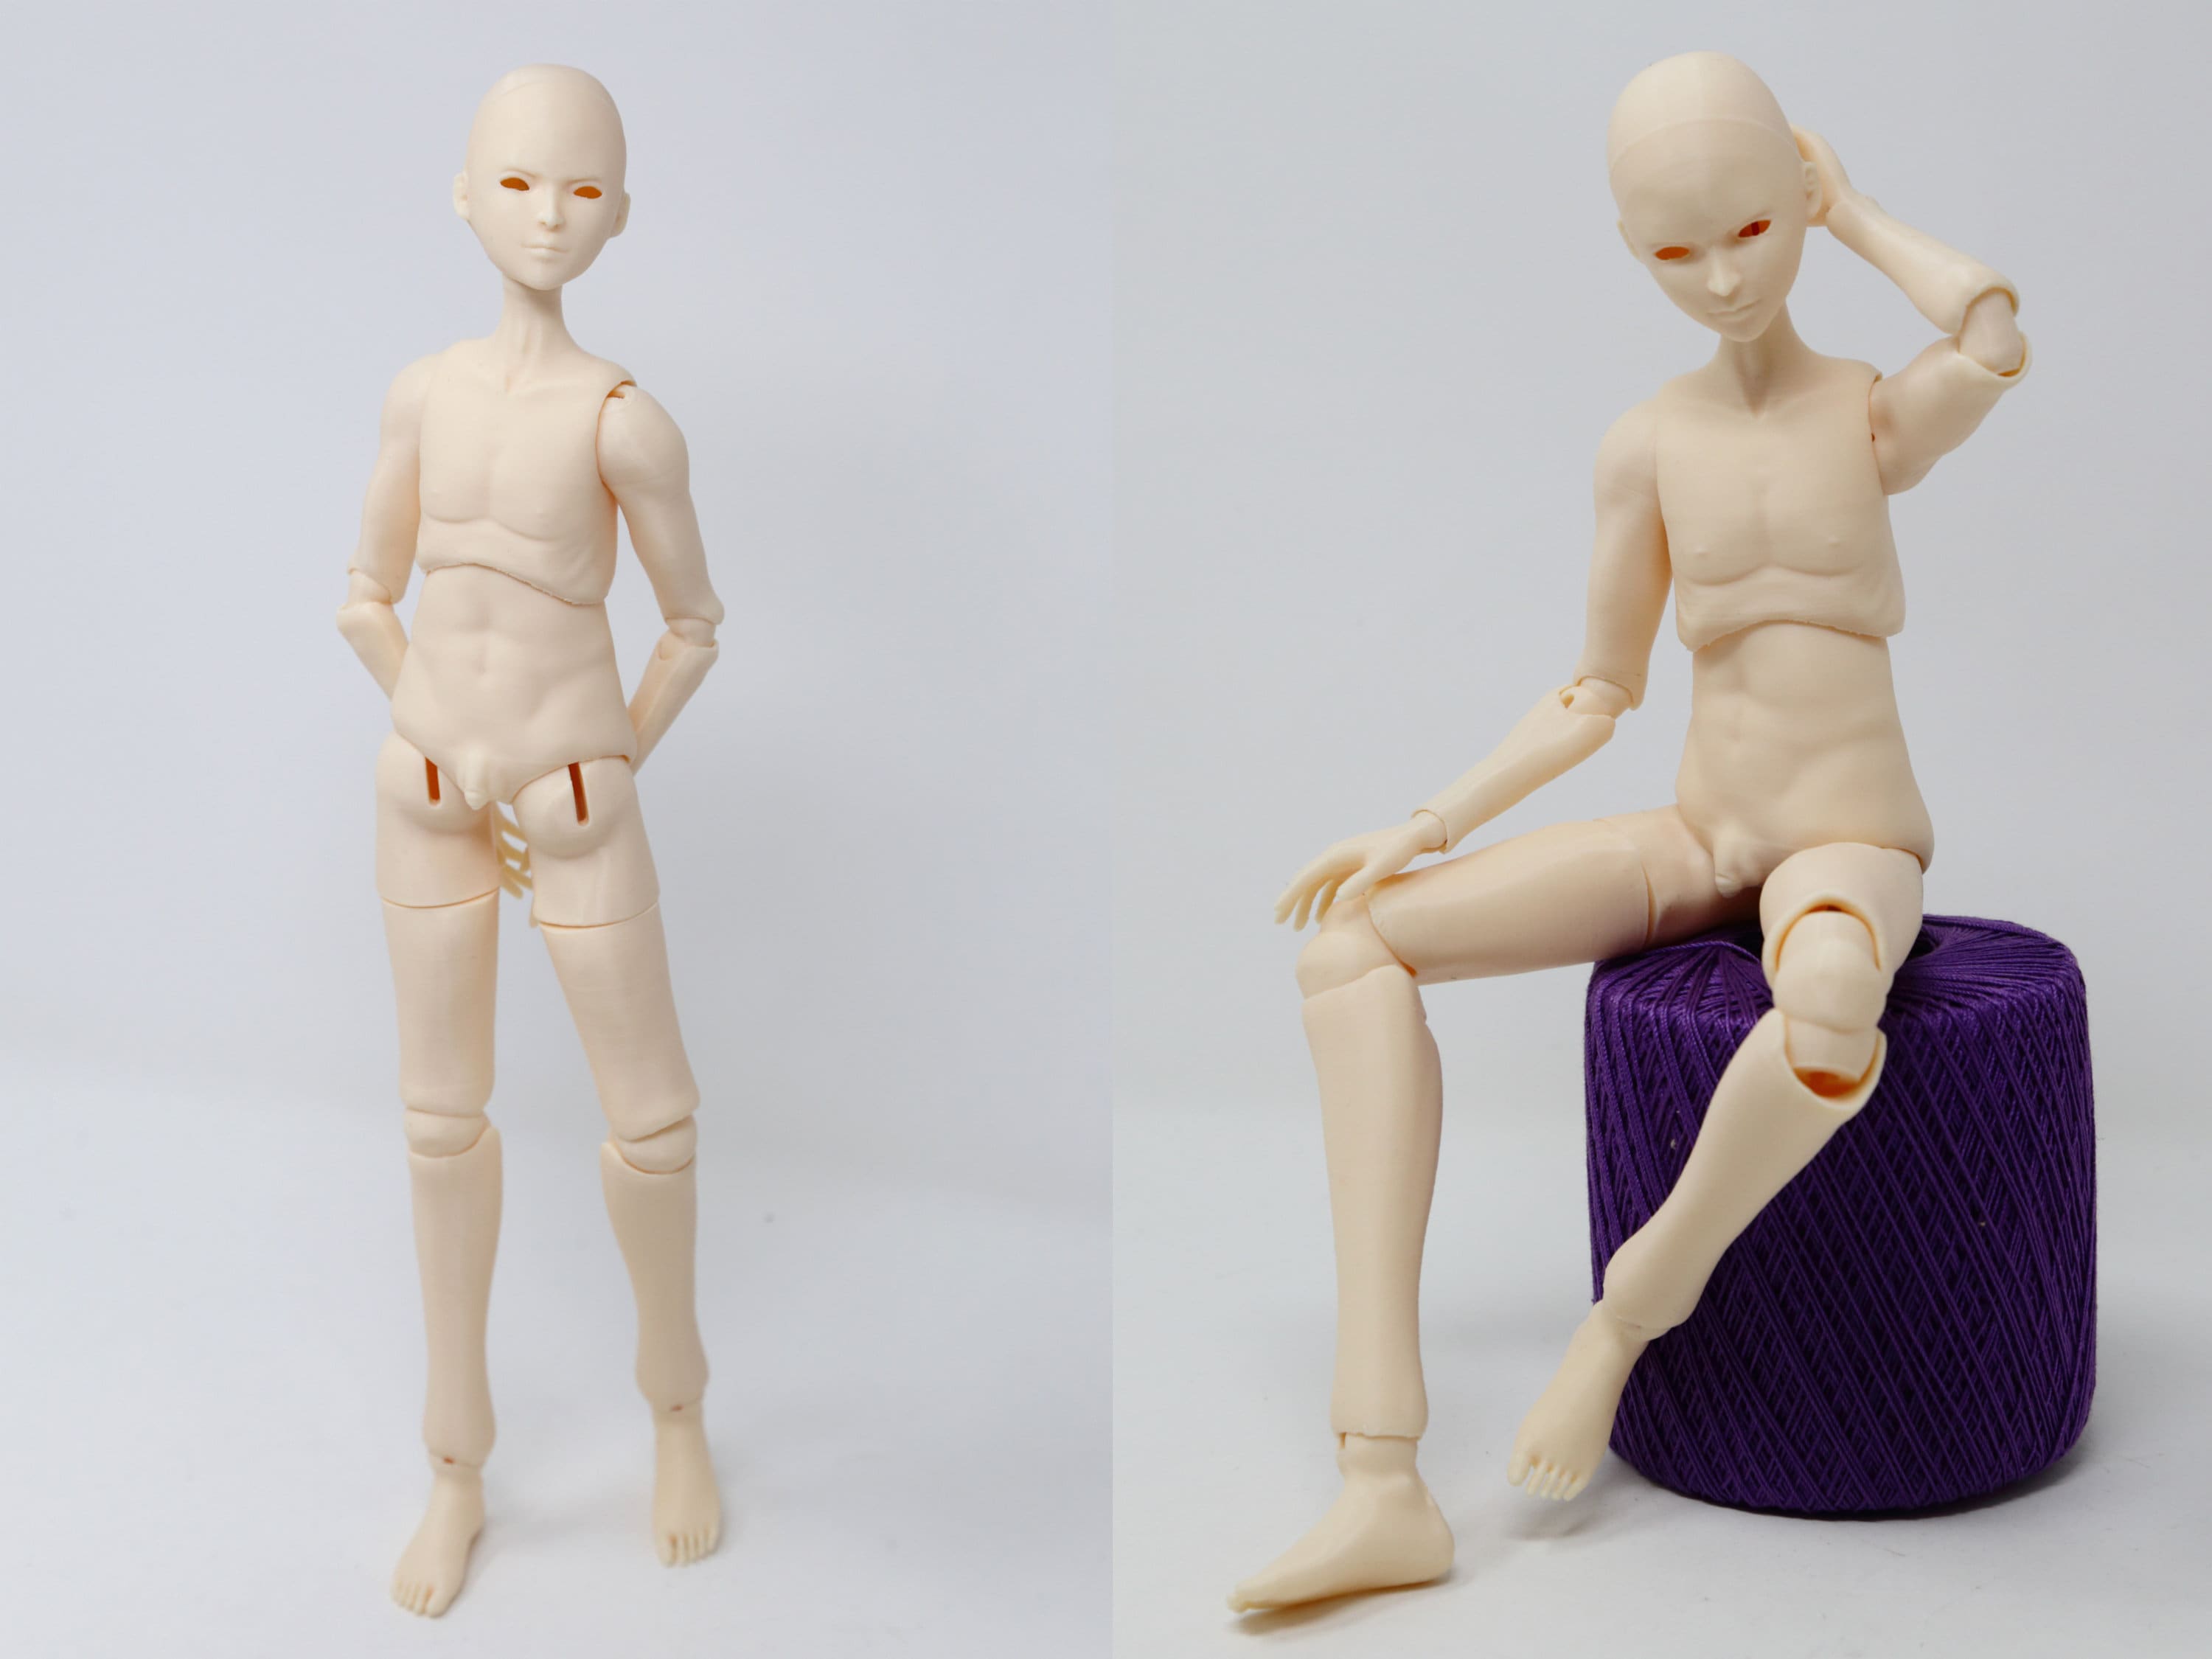 3D Printed PLA / Resin BJD Girl Ball Jointed Doll, 1/6 Yo-sd 30cm Assembled  Unpainted No Make up Doll 